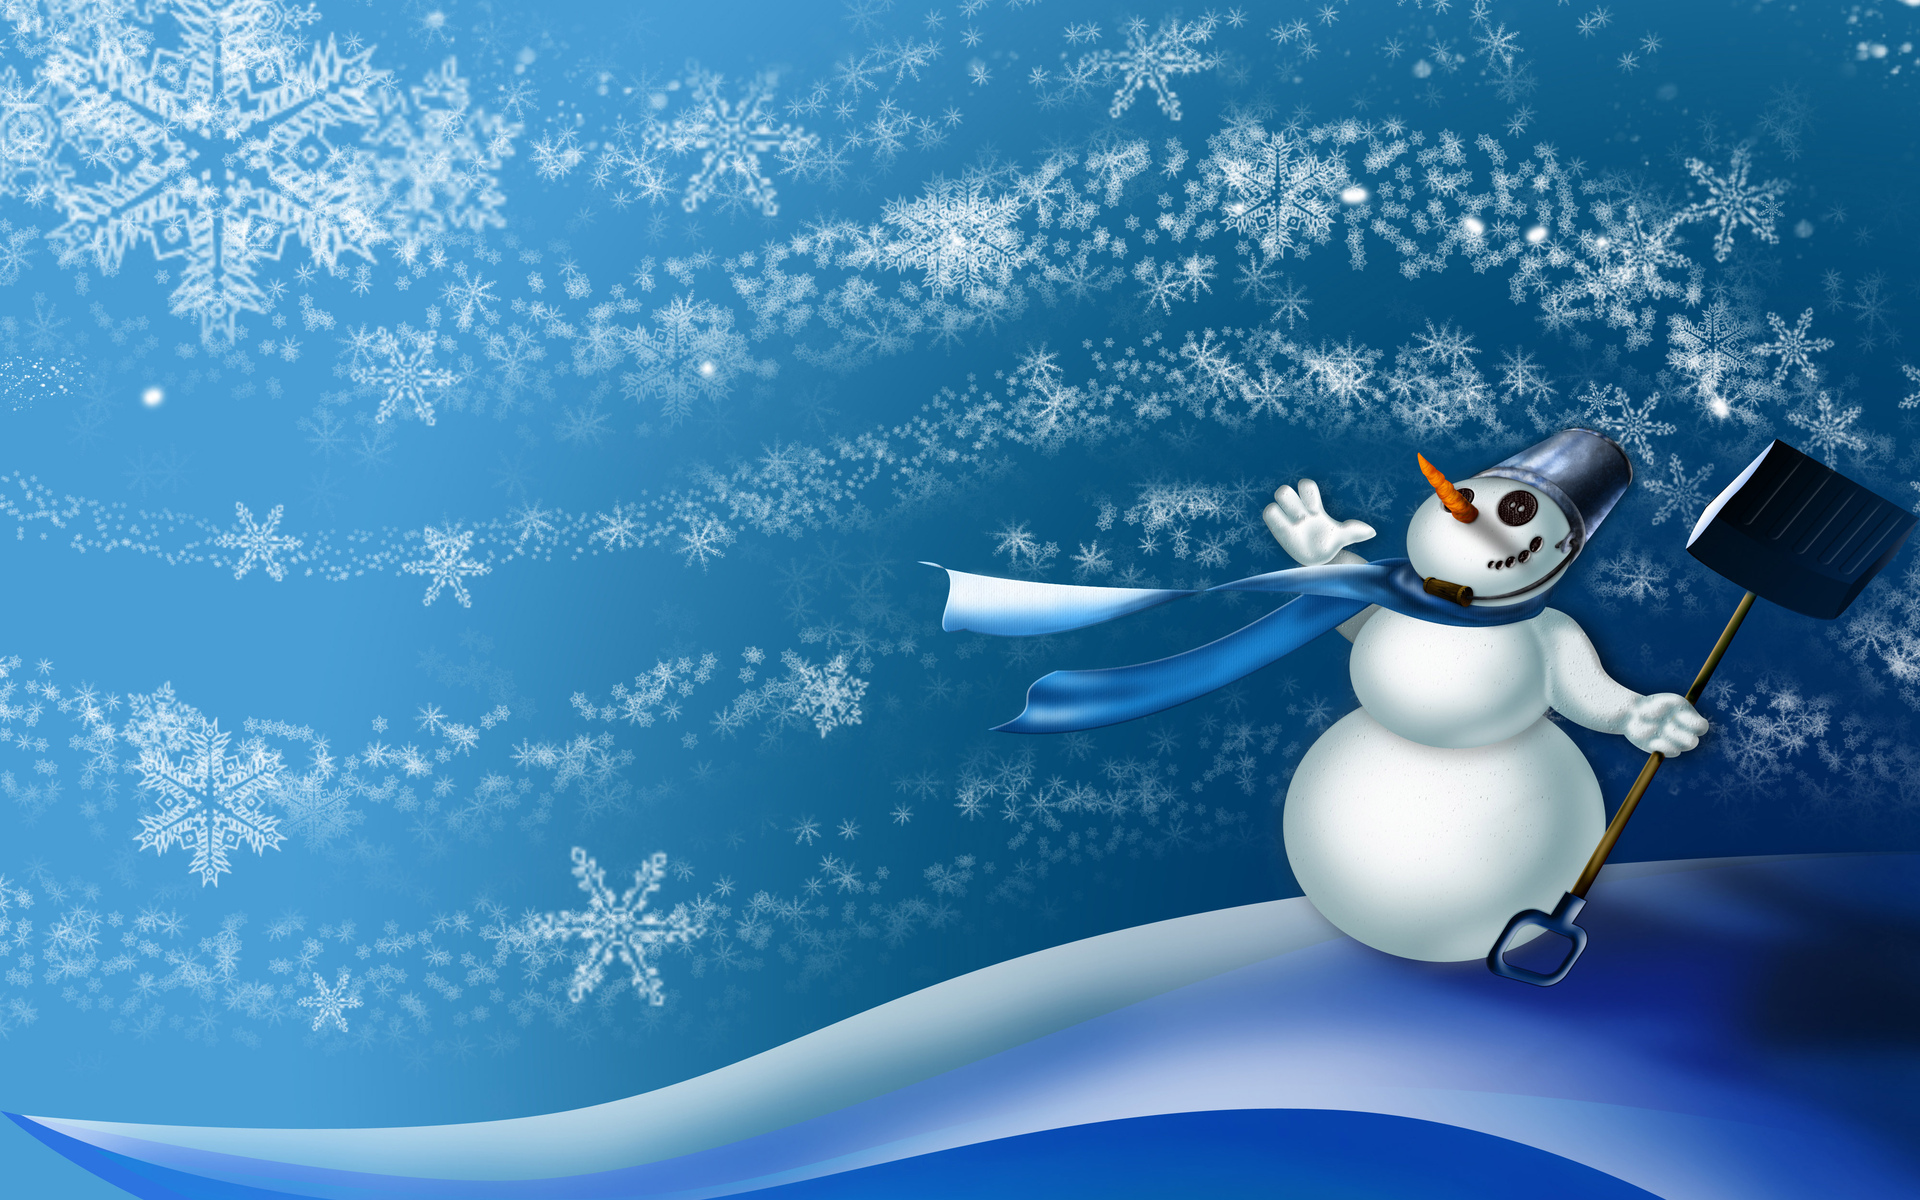 Wind Scarf Christmas Wallpaper